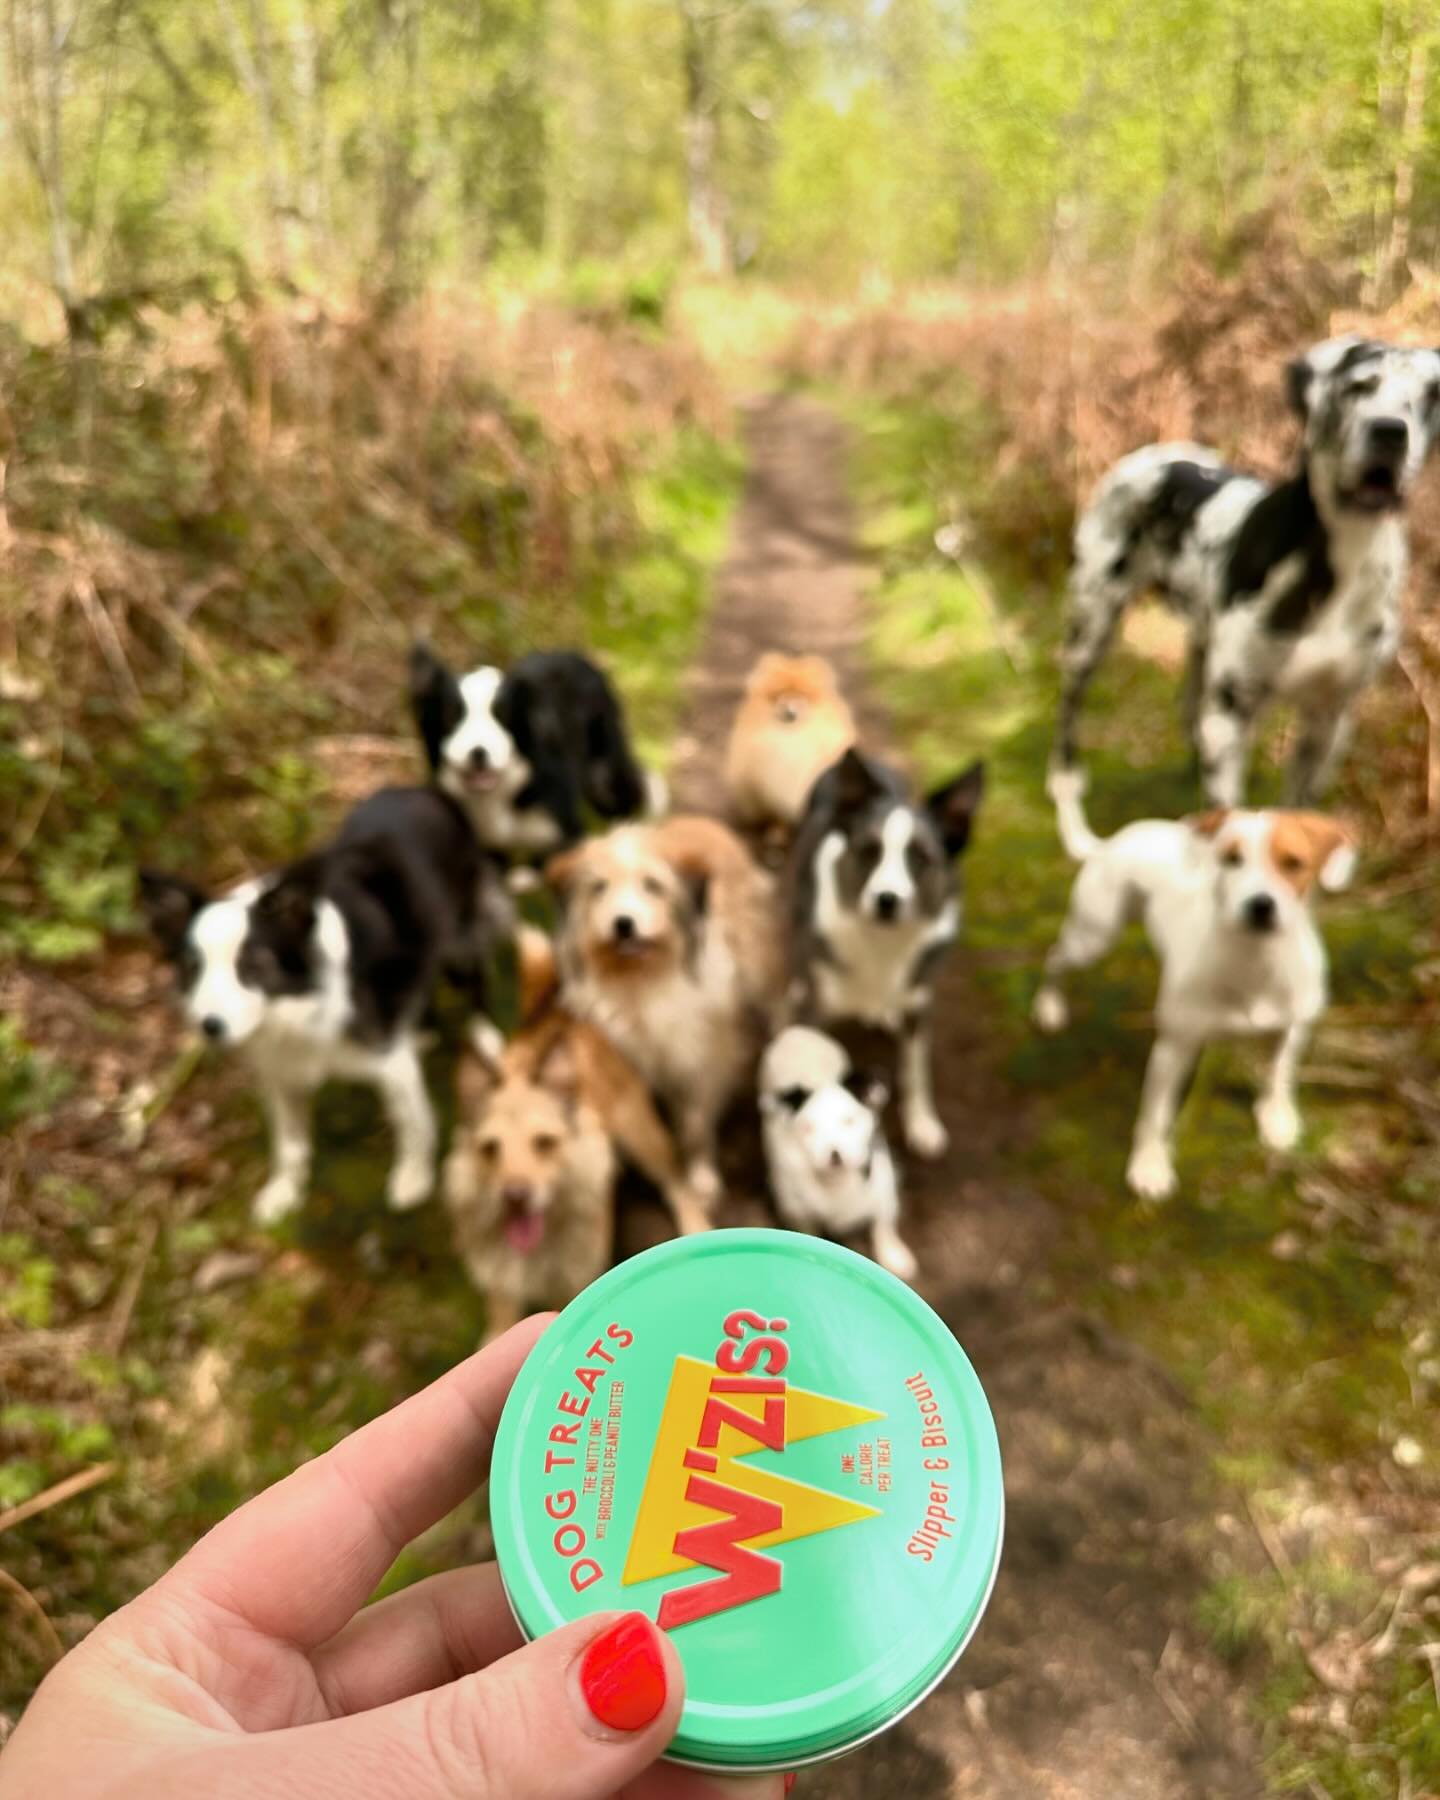 How much fun are these?! Meat free (not every treat needs to be meat), gorgeous packaging and most importantly, the dogs love them! @wzis.dog the gang love your fun treats! 
#wzis #wziswoofers #dogtreats #meatfree #crueltyfree #vegetarian #happydogs